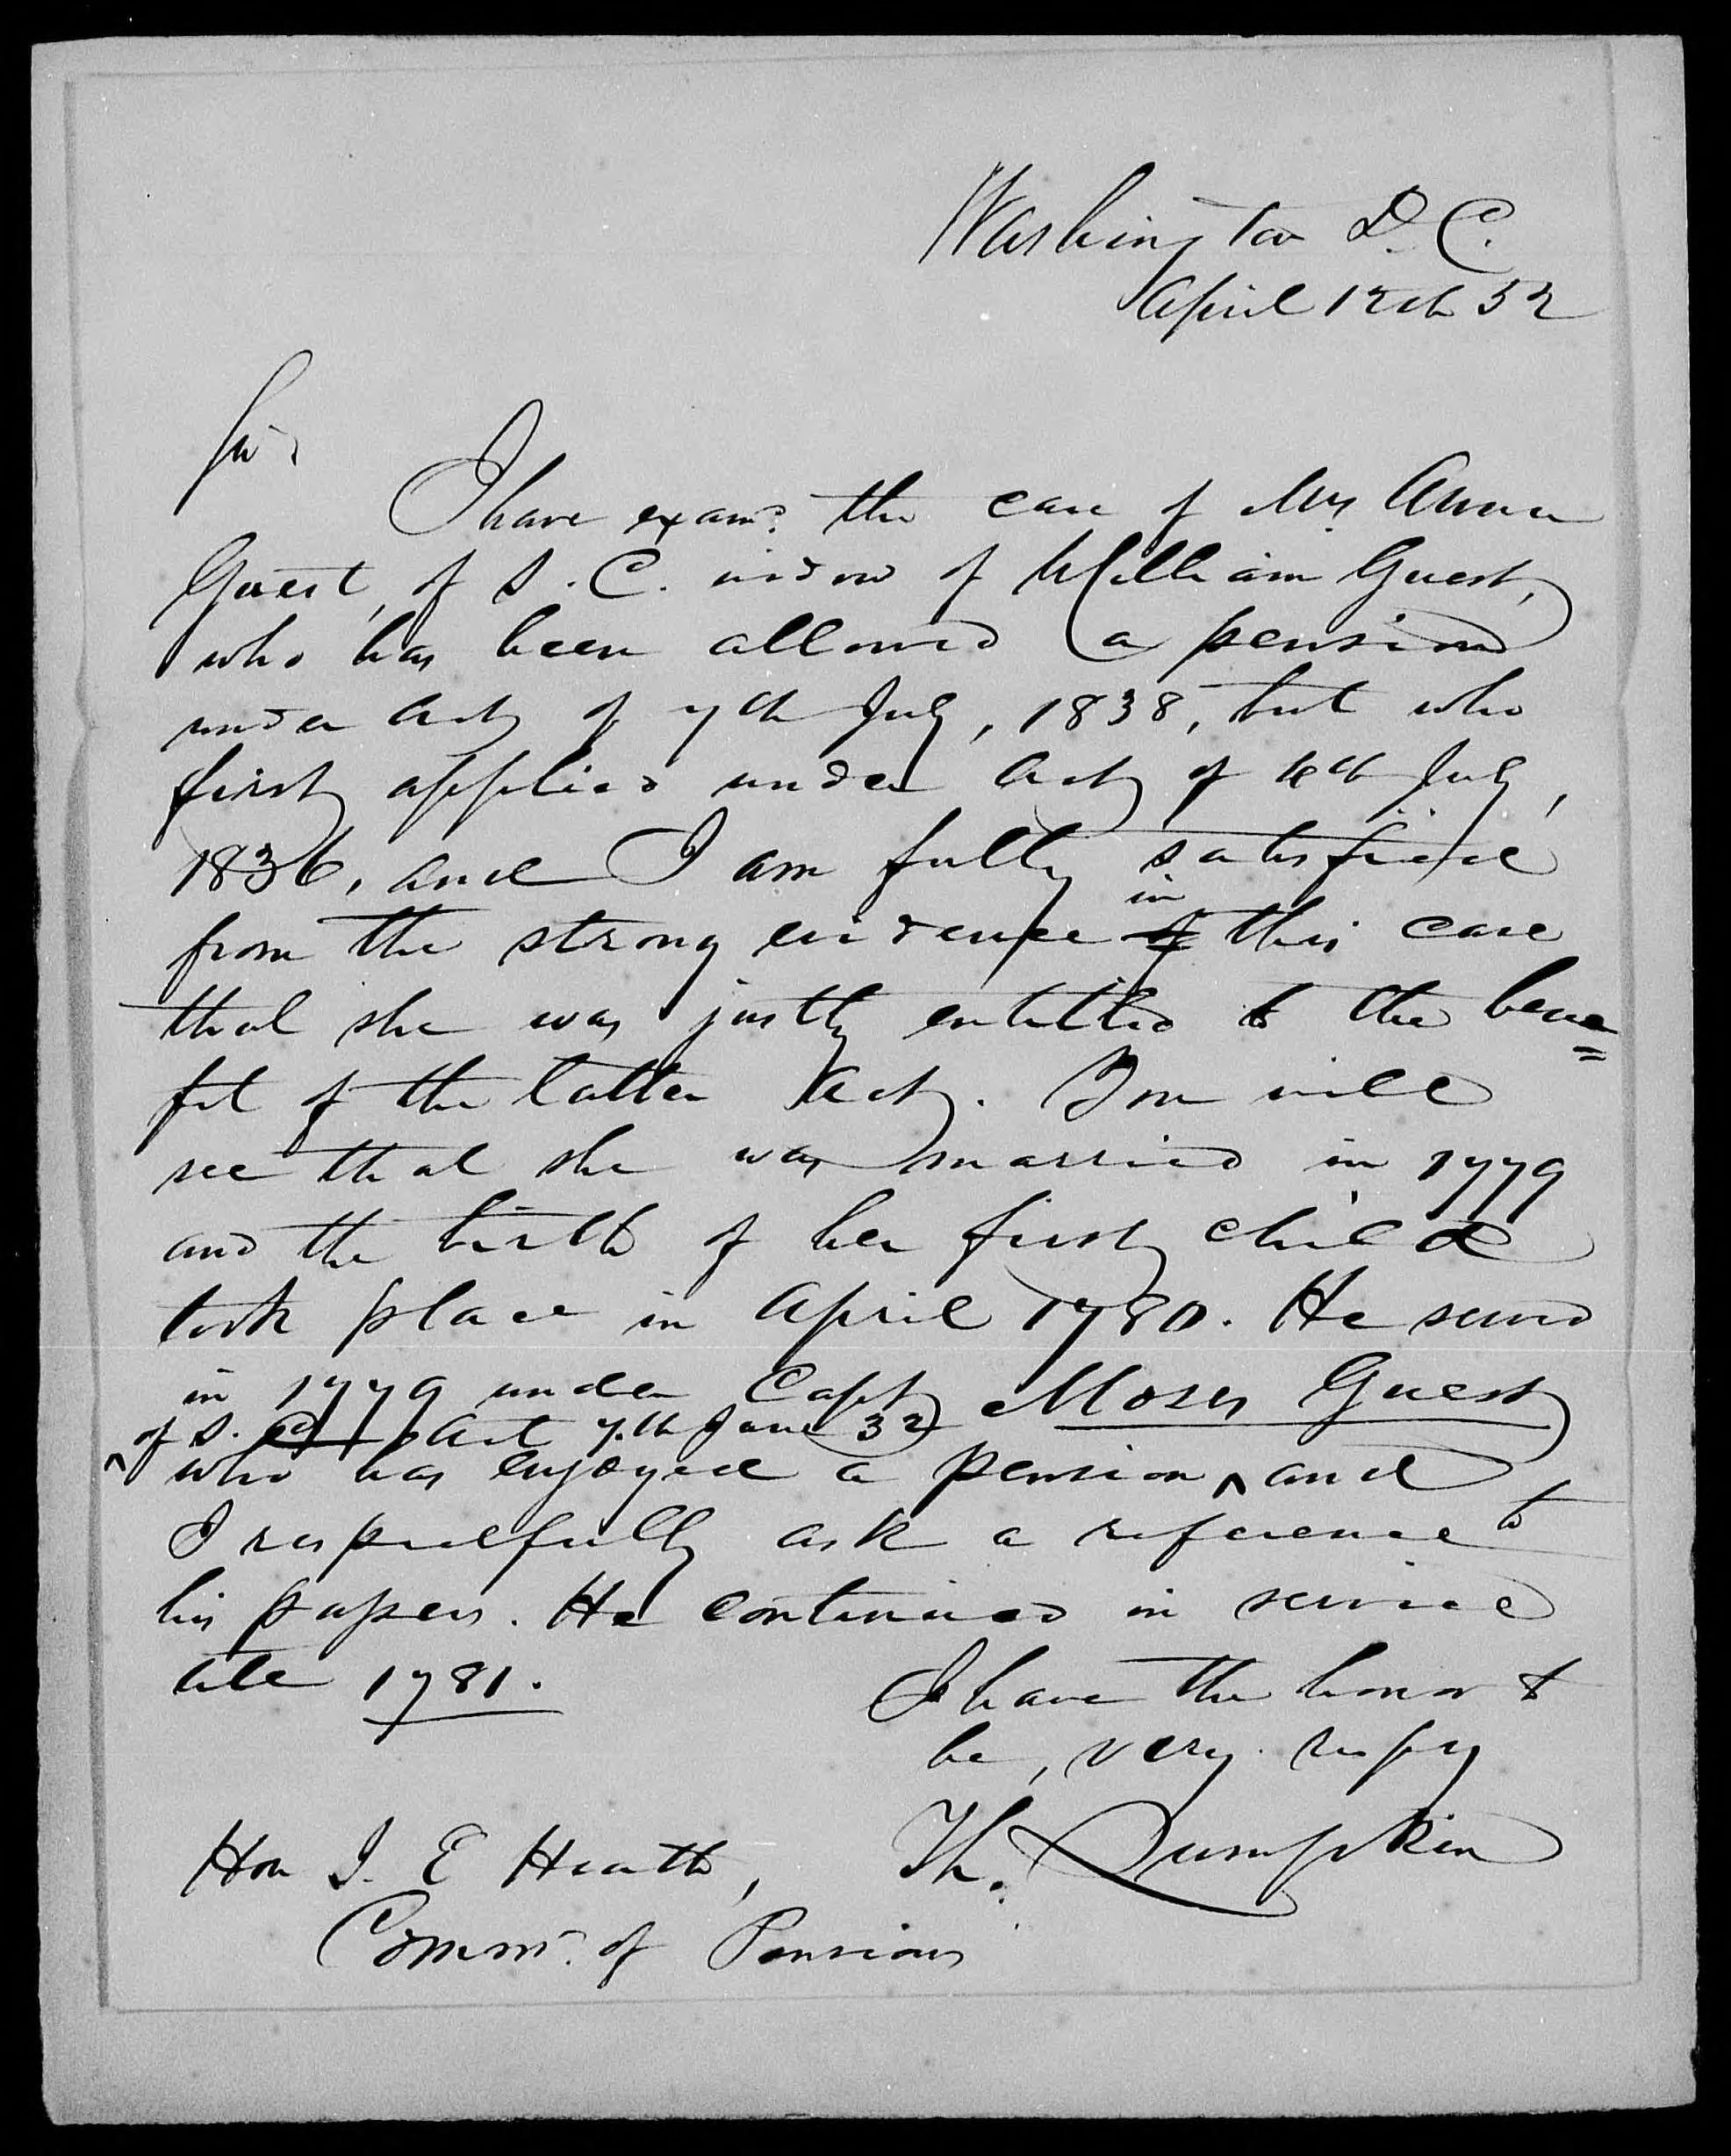 Letter from Thomas Lumpkin to James Ewell Heath, 12 April 1852, page 1